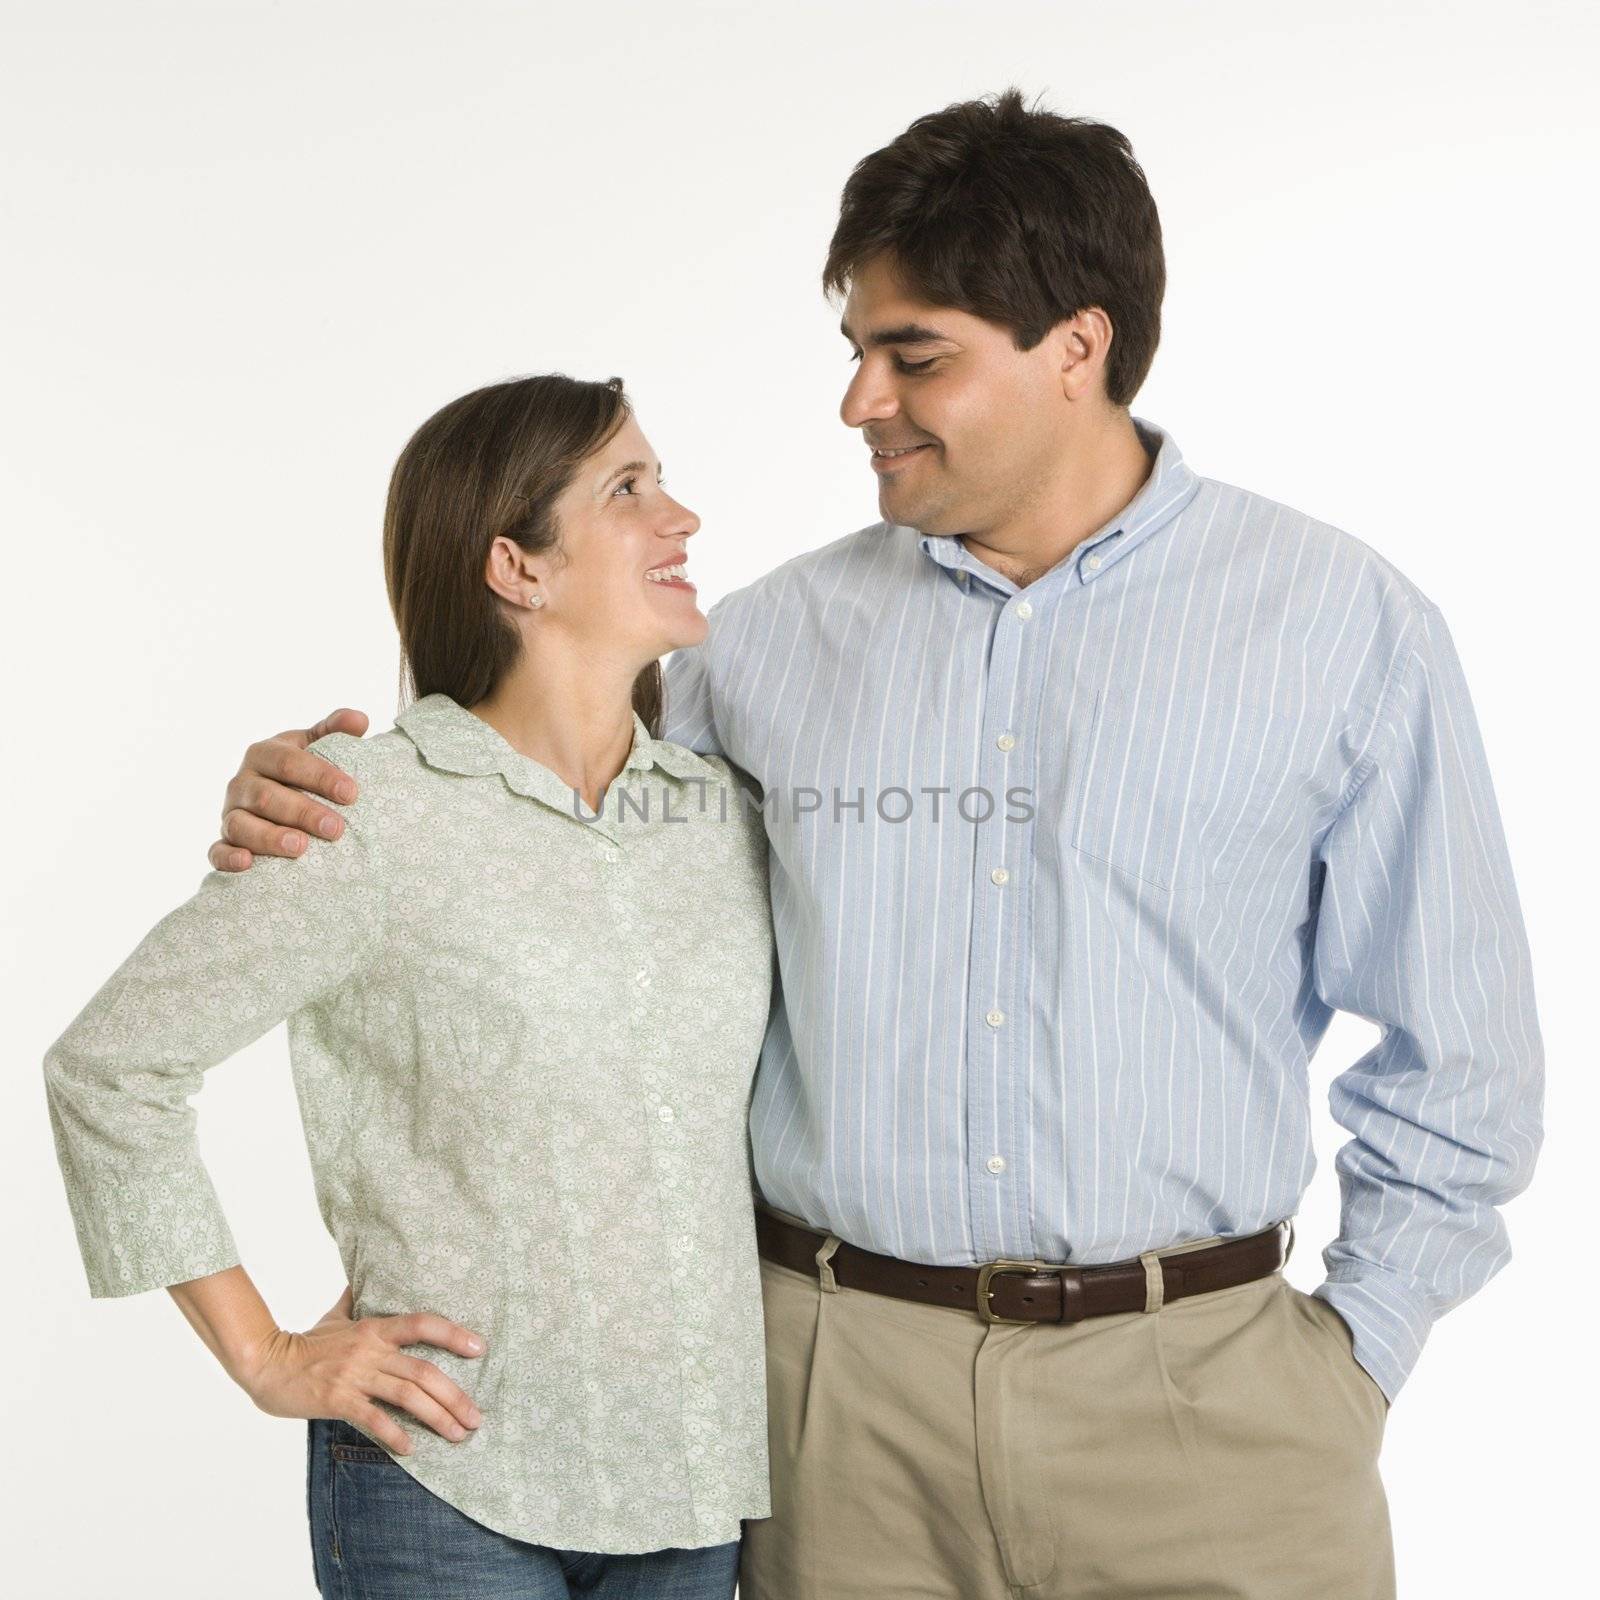 Couple standing smiling at eachother against white background.